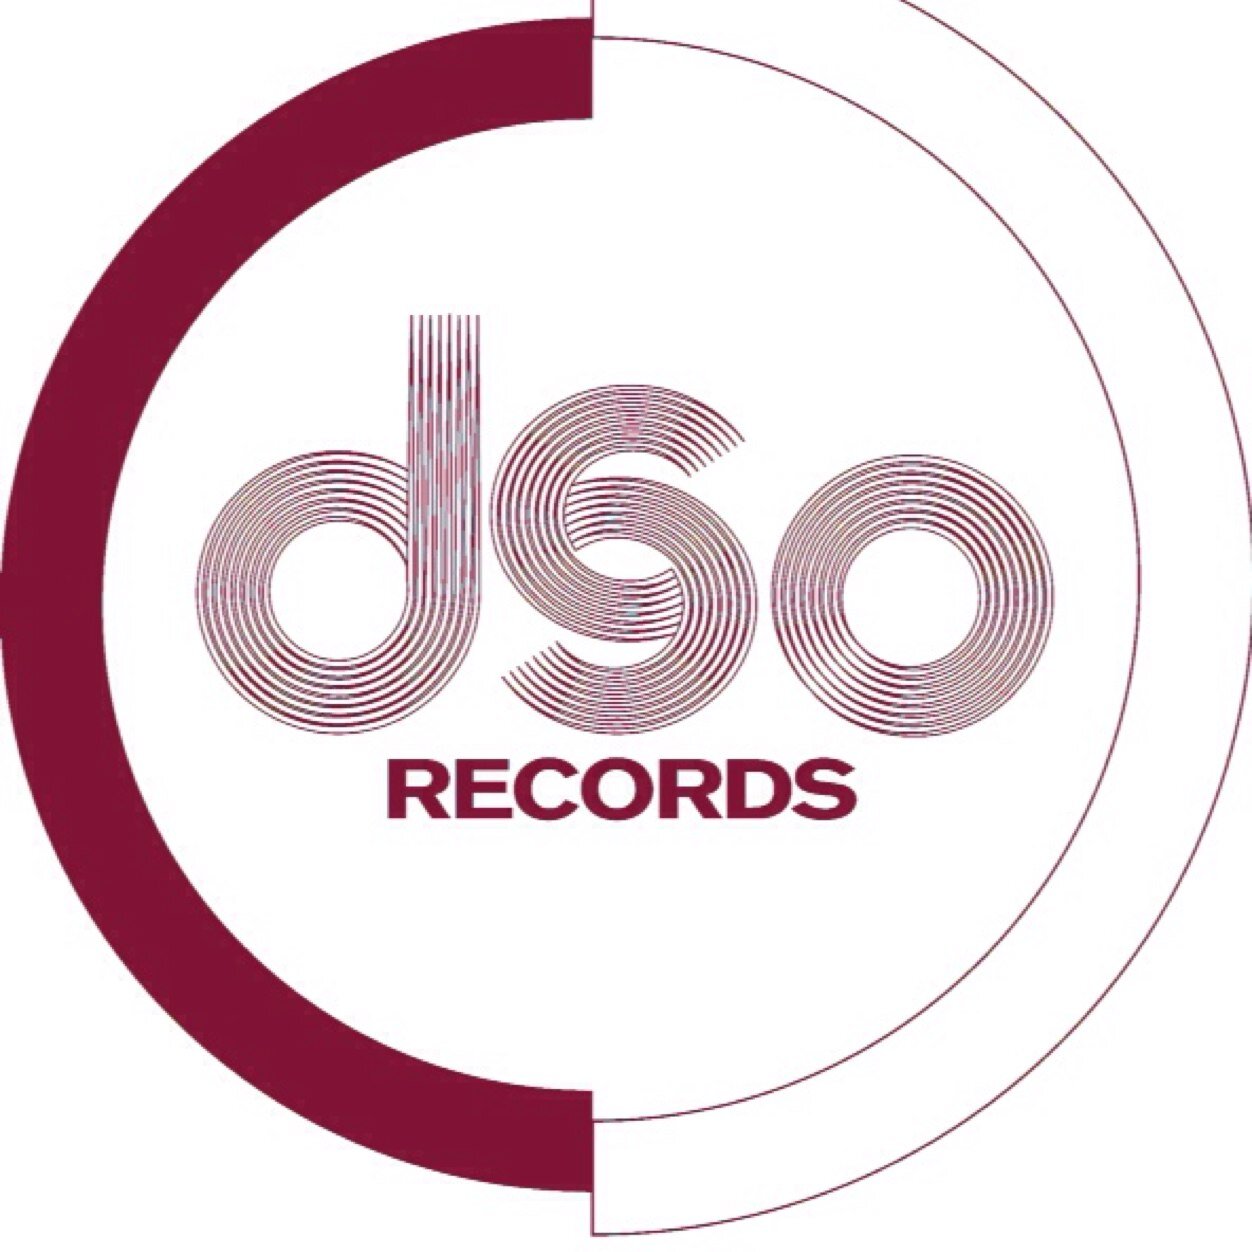 DSO Records, (Dashsoundsoff) is a record label, management and entertainment company, founded by Dash, (Andre Dash). #GlobalSociety #360Magazine